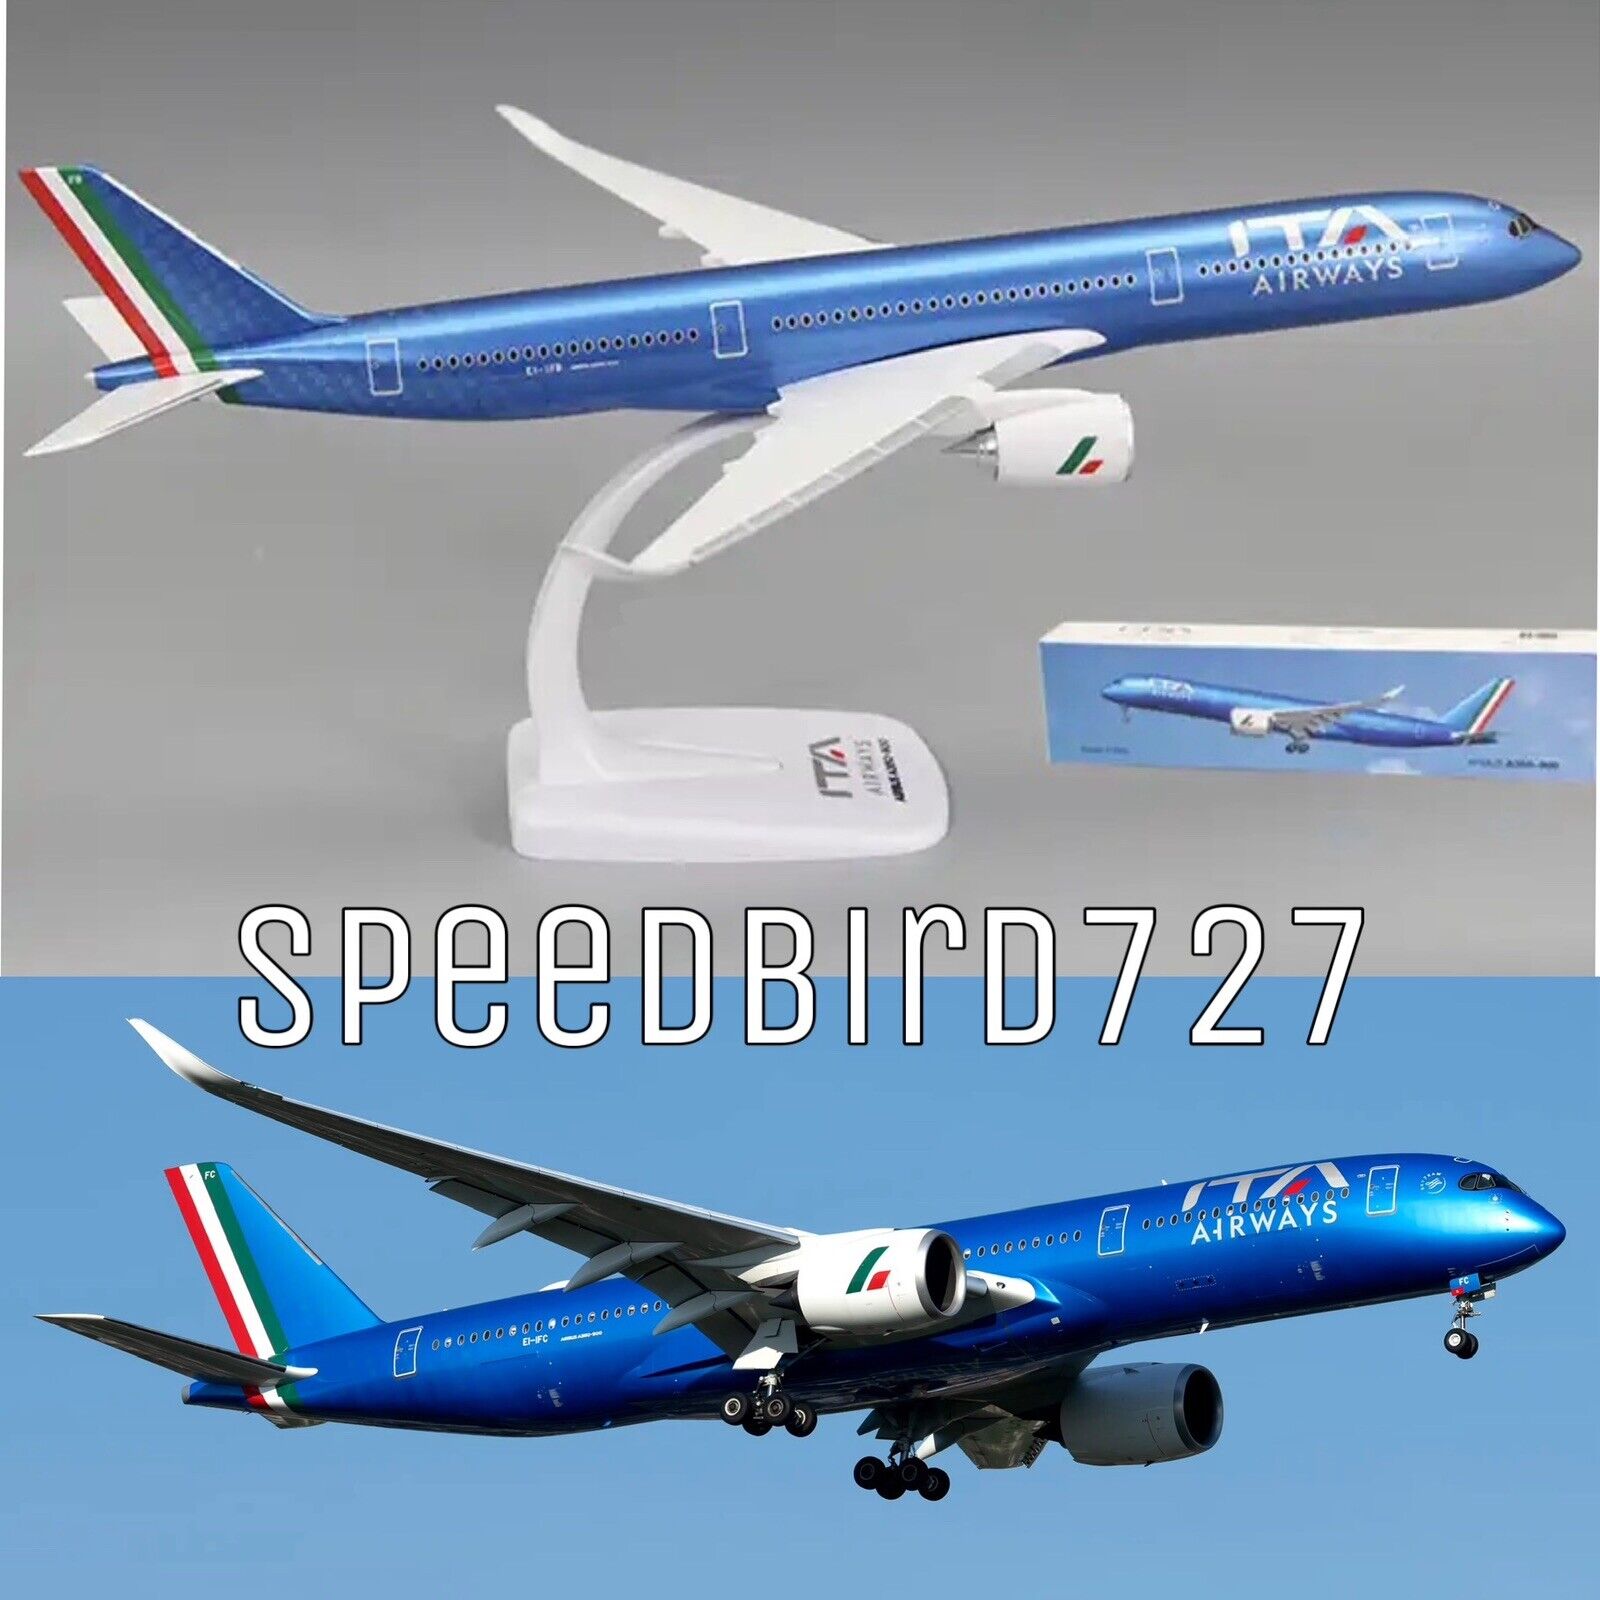 1/200 Scale Airplane Model - ITA Airlines Airbus A350-900 Model With Stand